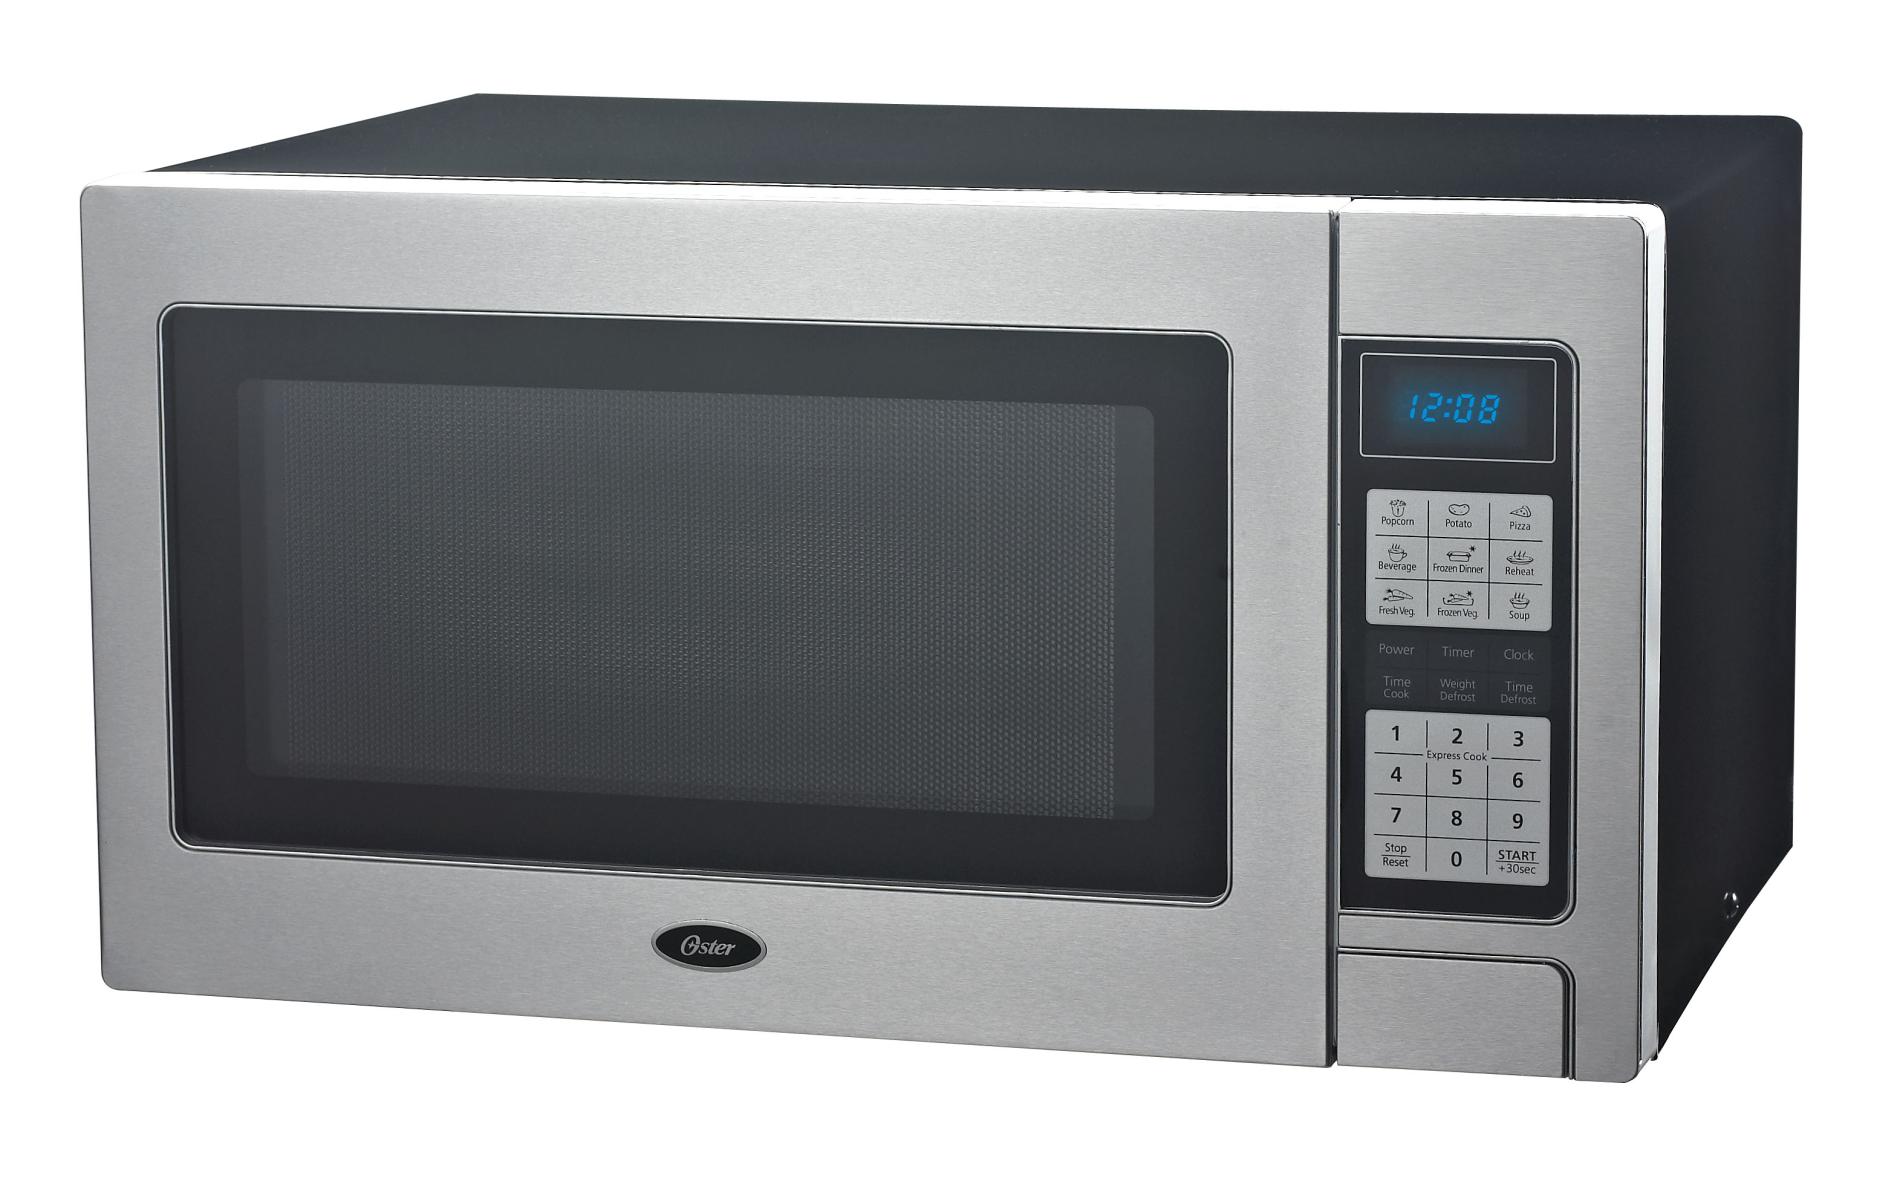 Oster OGZD1102 Stainless Steel 1000 Watt Microwave Oven 1000 Watt Microwave Stainless Steel